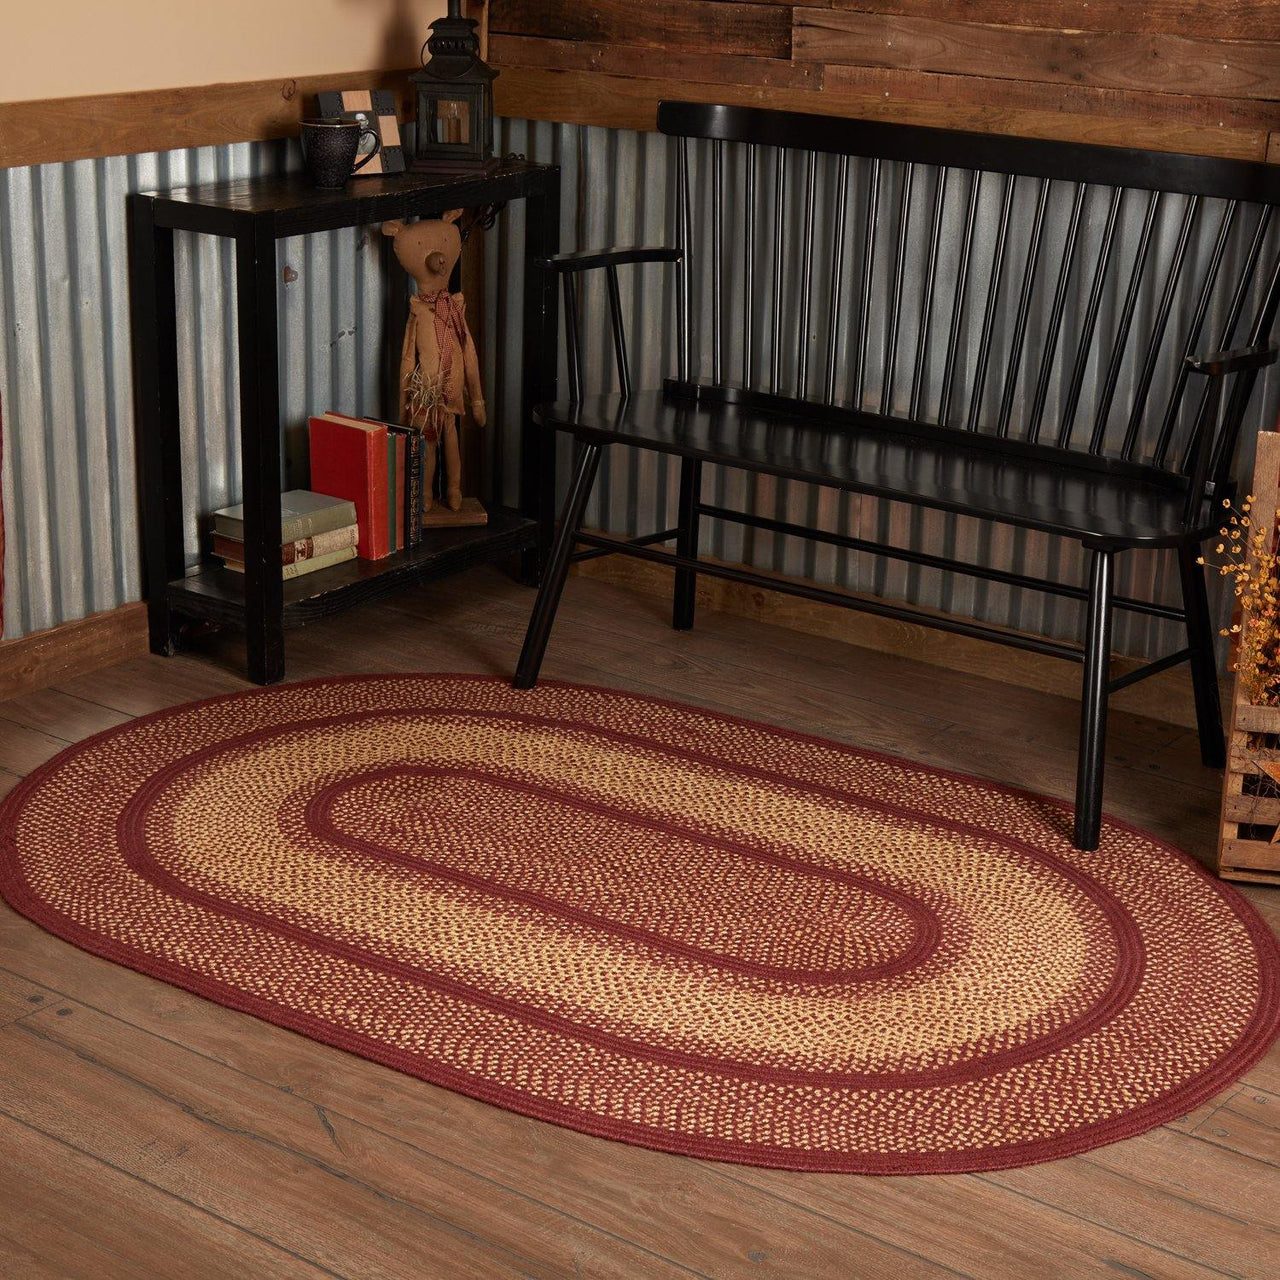 Burgundy Red Primitive Jute Braided Rug Oval 4'x6' with Rug Pad VHC Brands - The Fox Decor